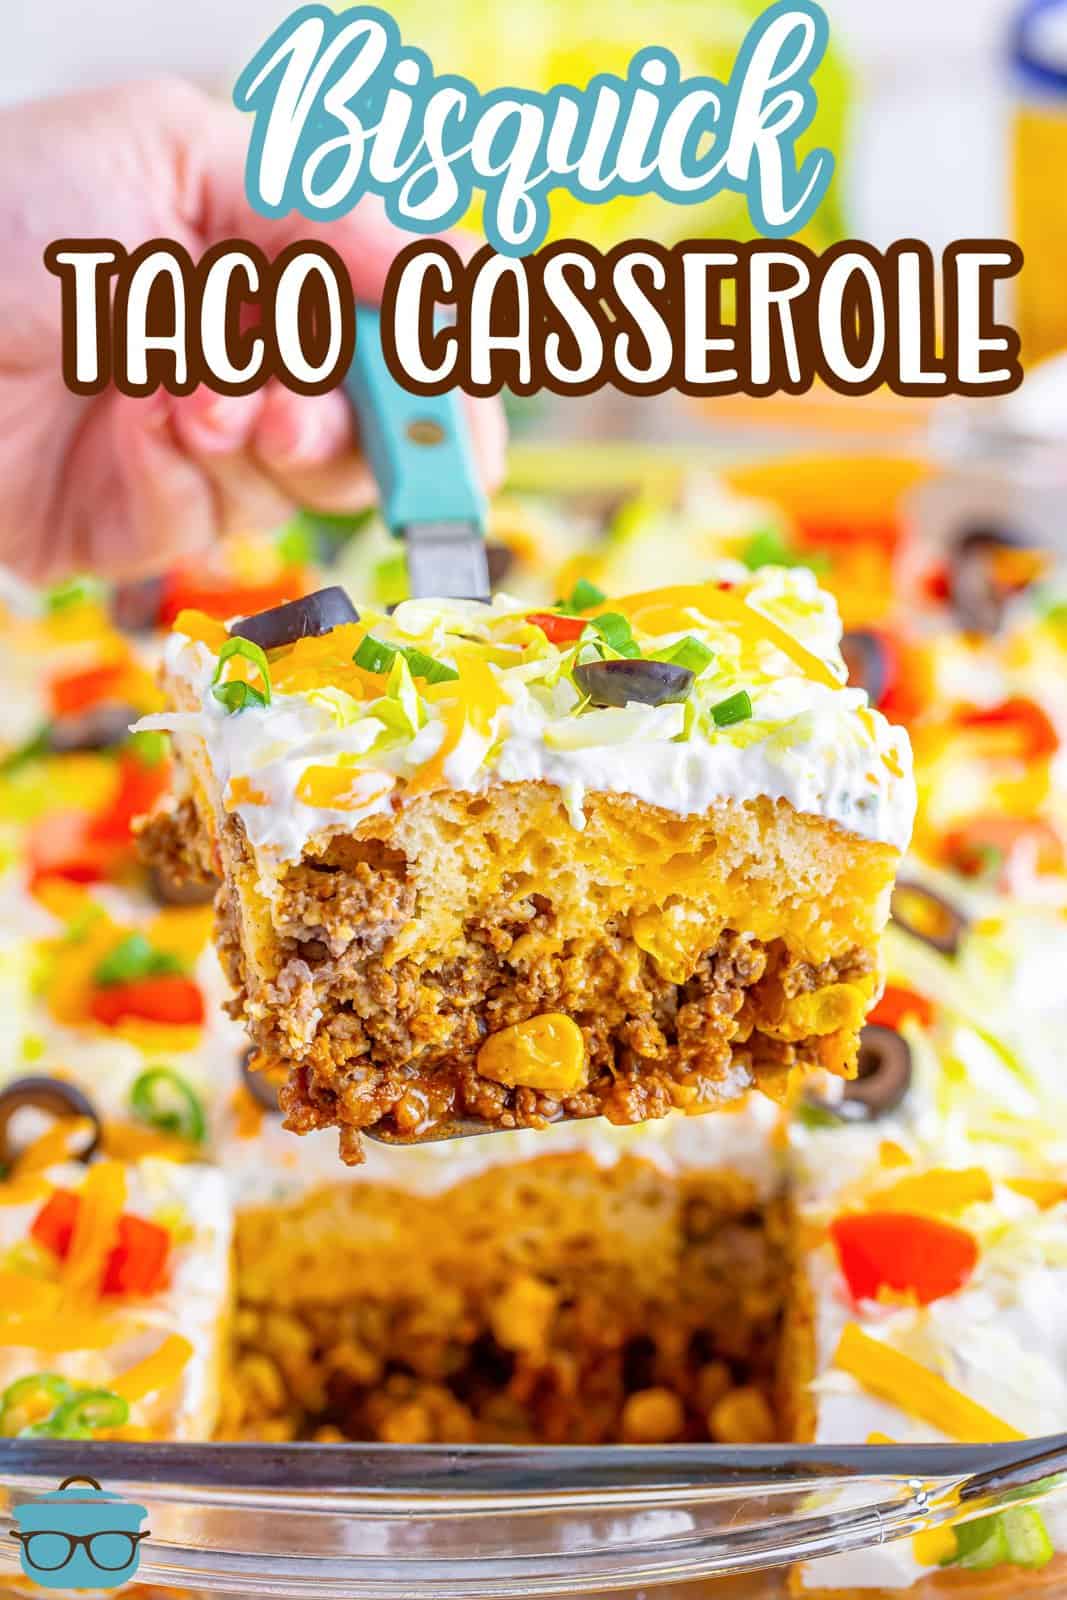 A serving utensil holding up a serving of taco casserole with bisquick.